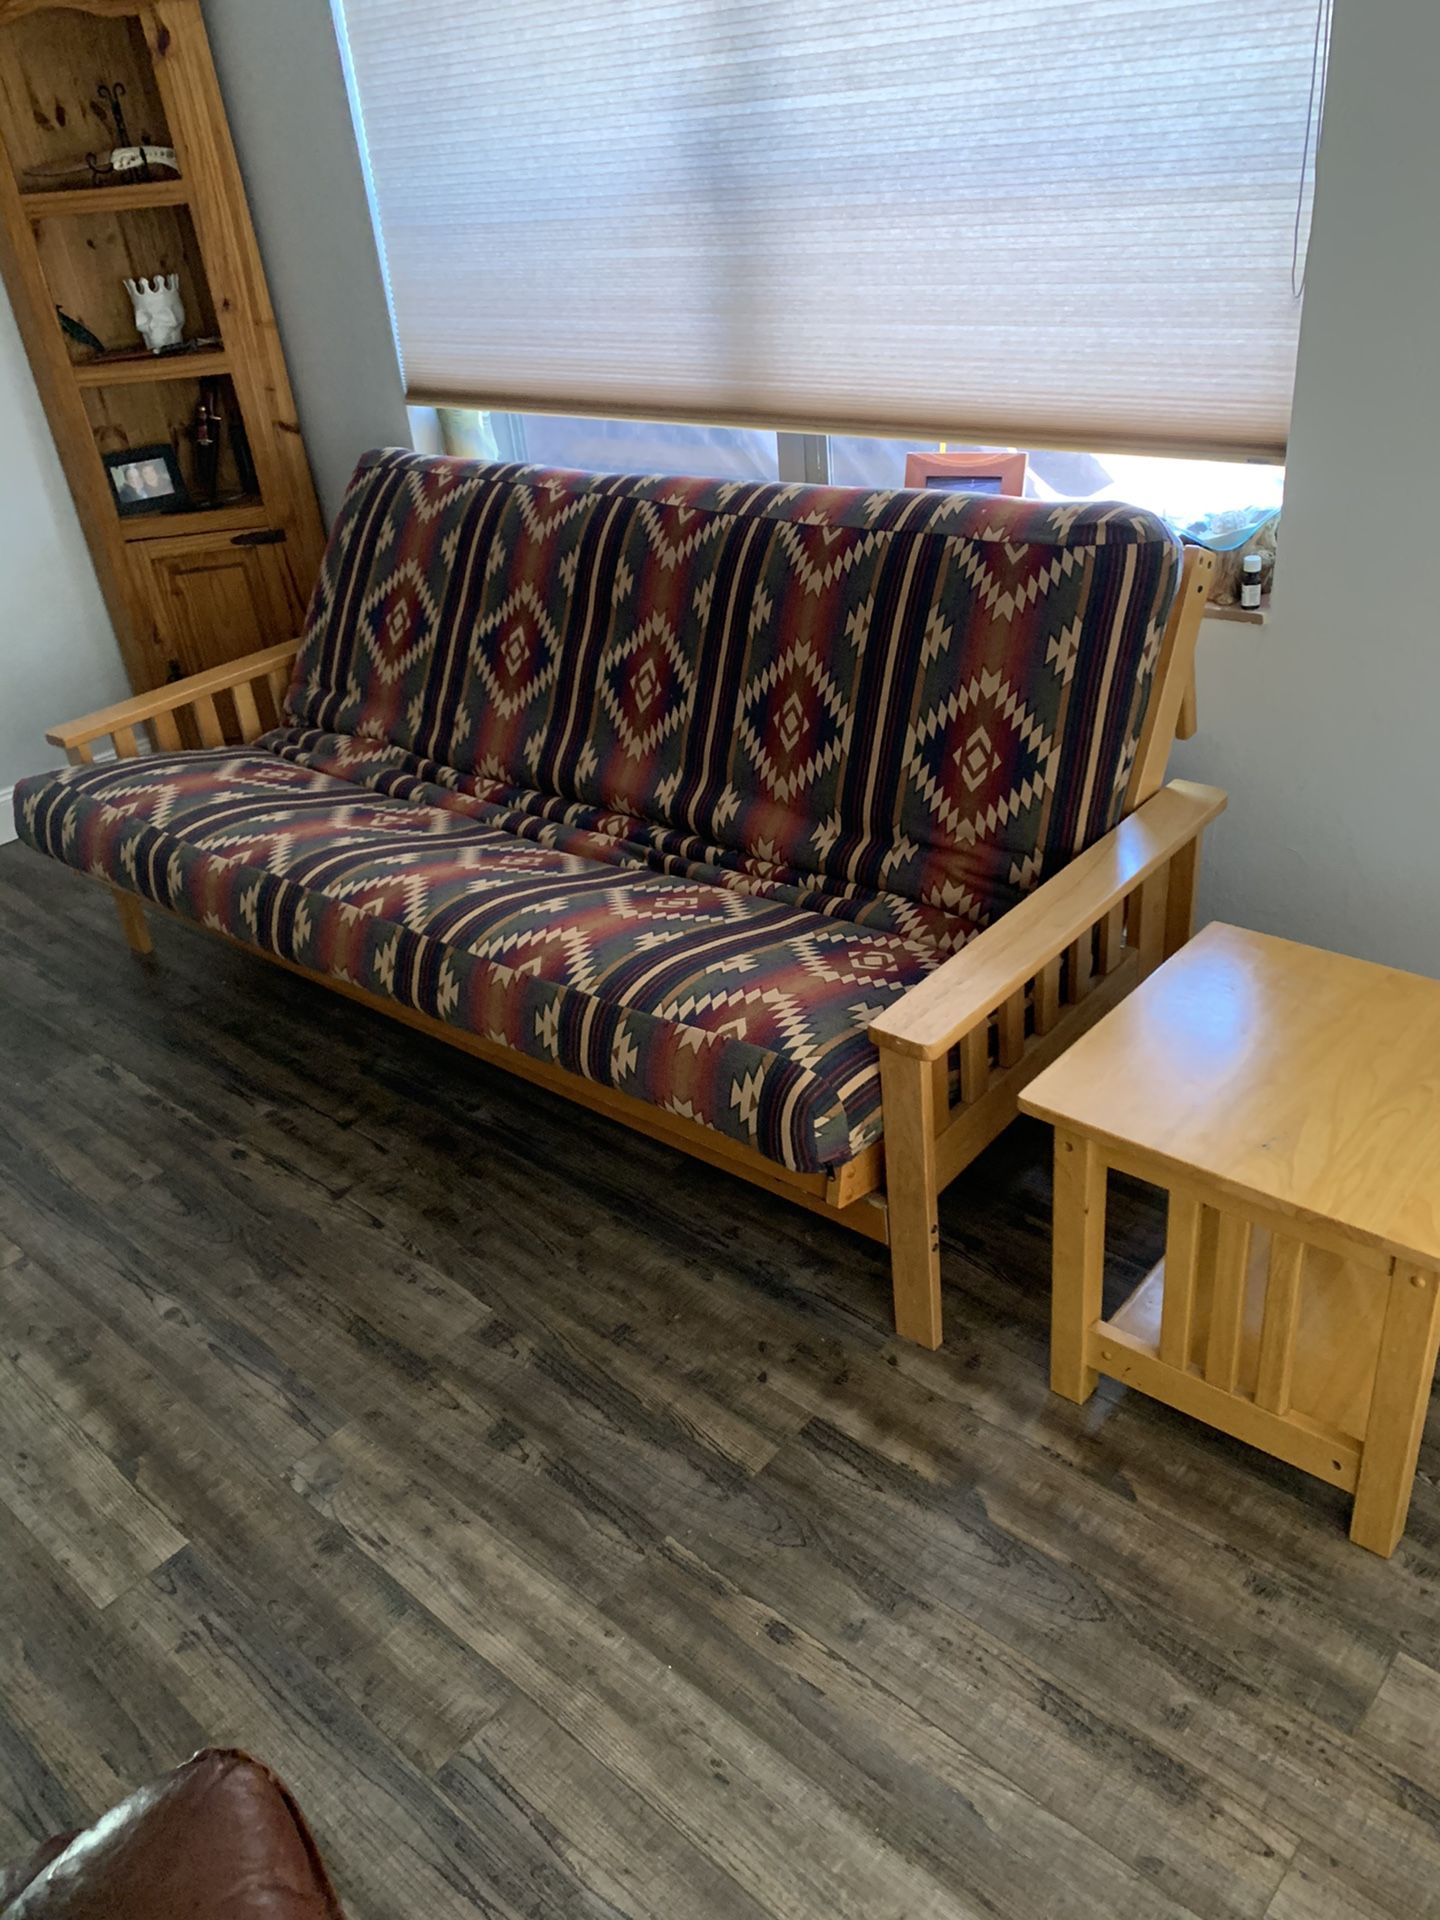 Futon and end table